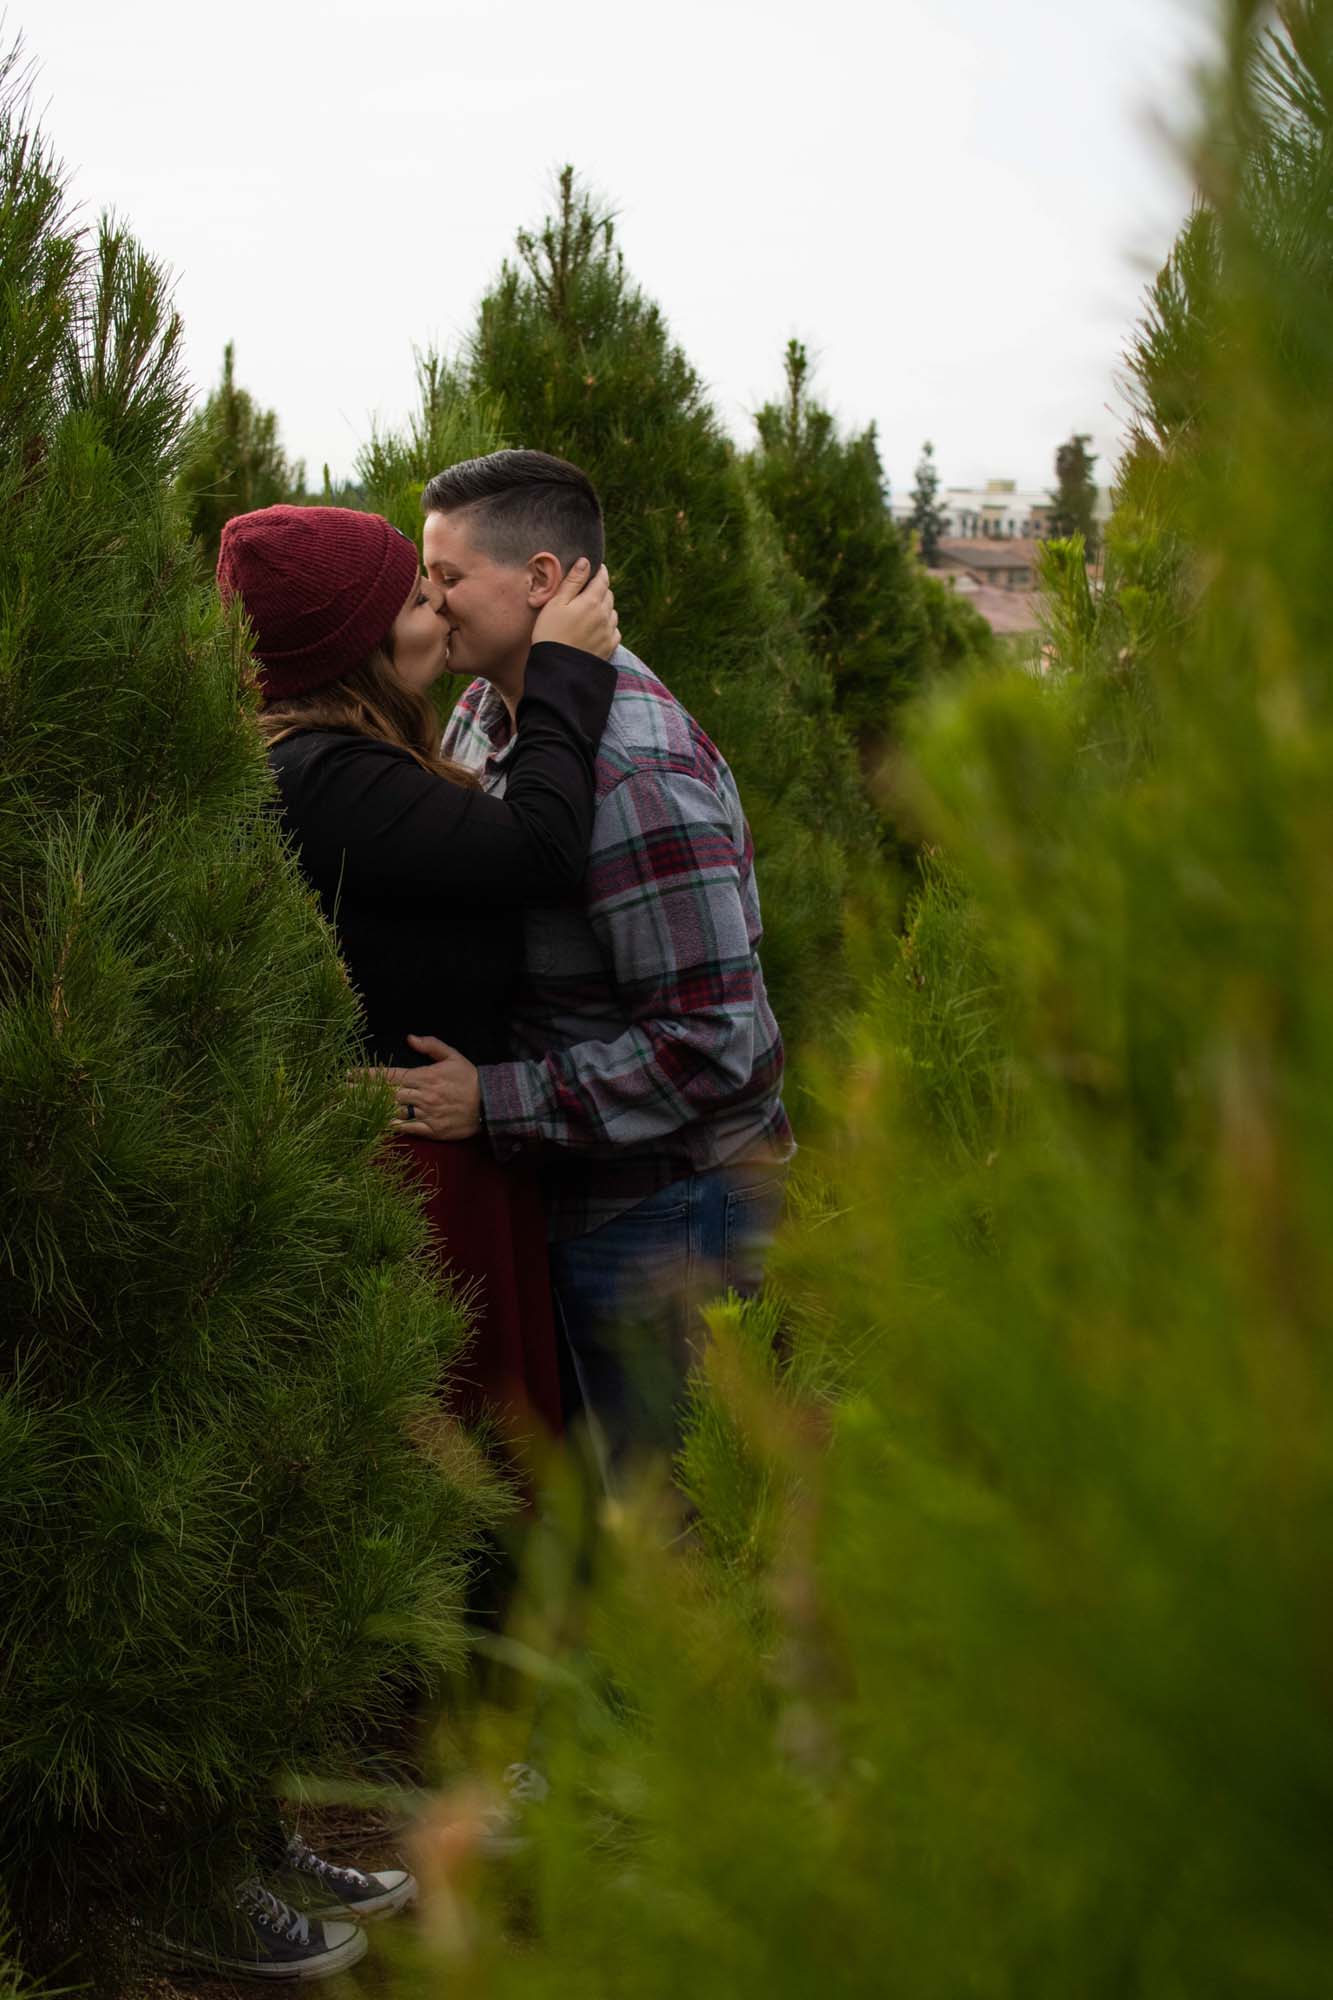 Casual and joyous engagement session at a California Christmas tree farm | Lauren Ashley Photo | Featured on Equally Wed, the leading LGBTQ+ wedding magazine